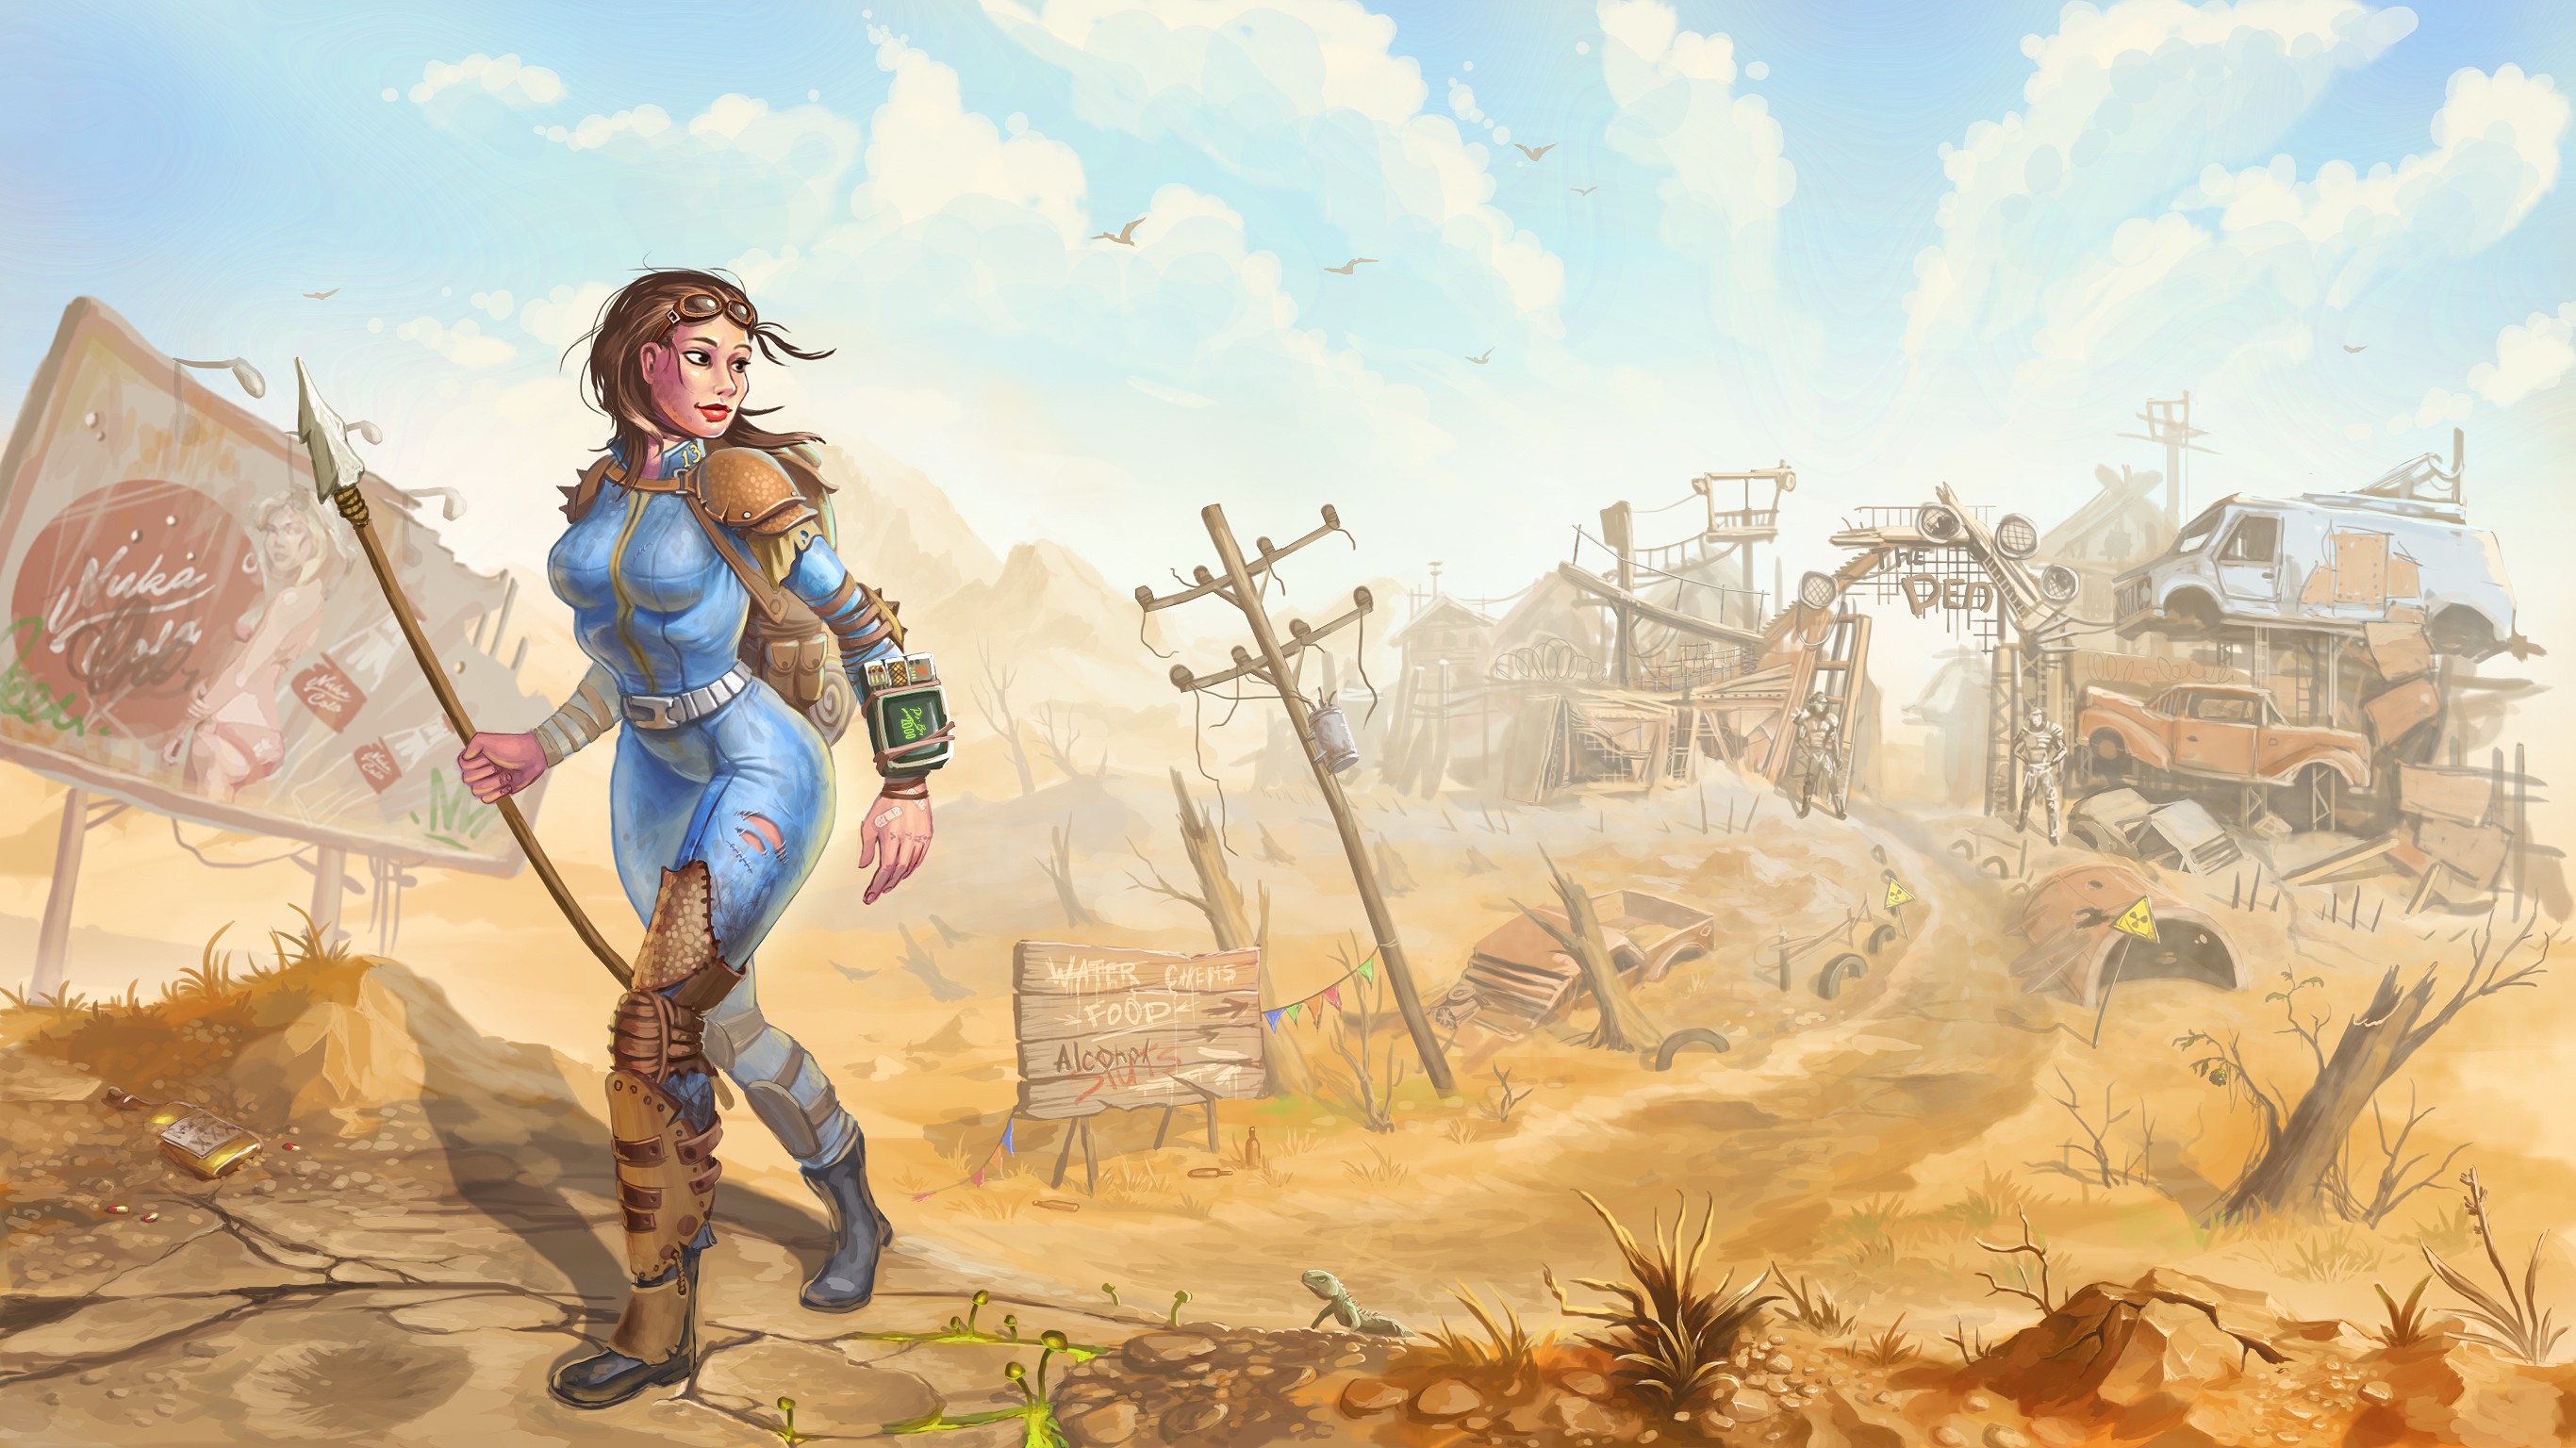 General 2732x1536 Fallout video games artwork video game art video game girls PC gaming brunette spear apocalyptic futuristic